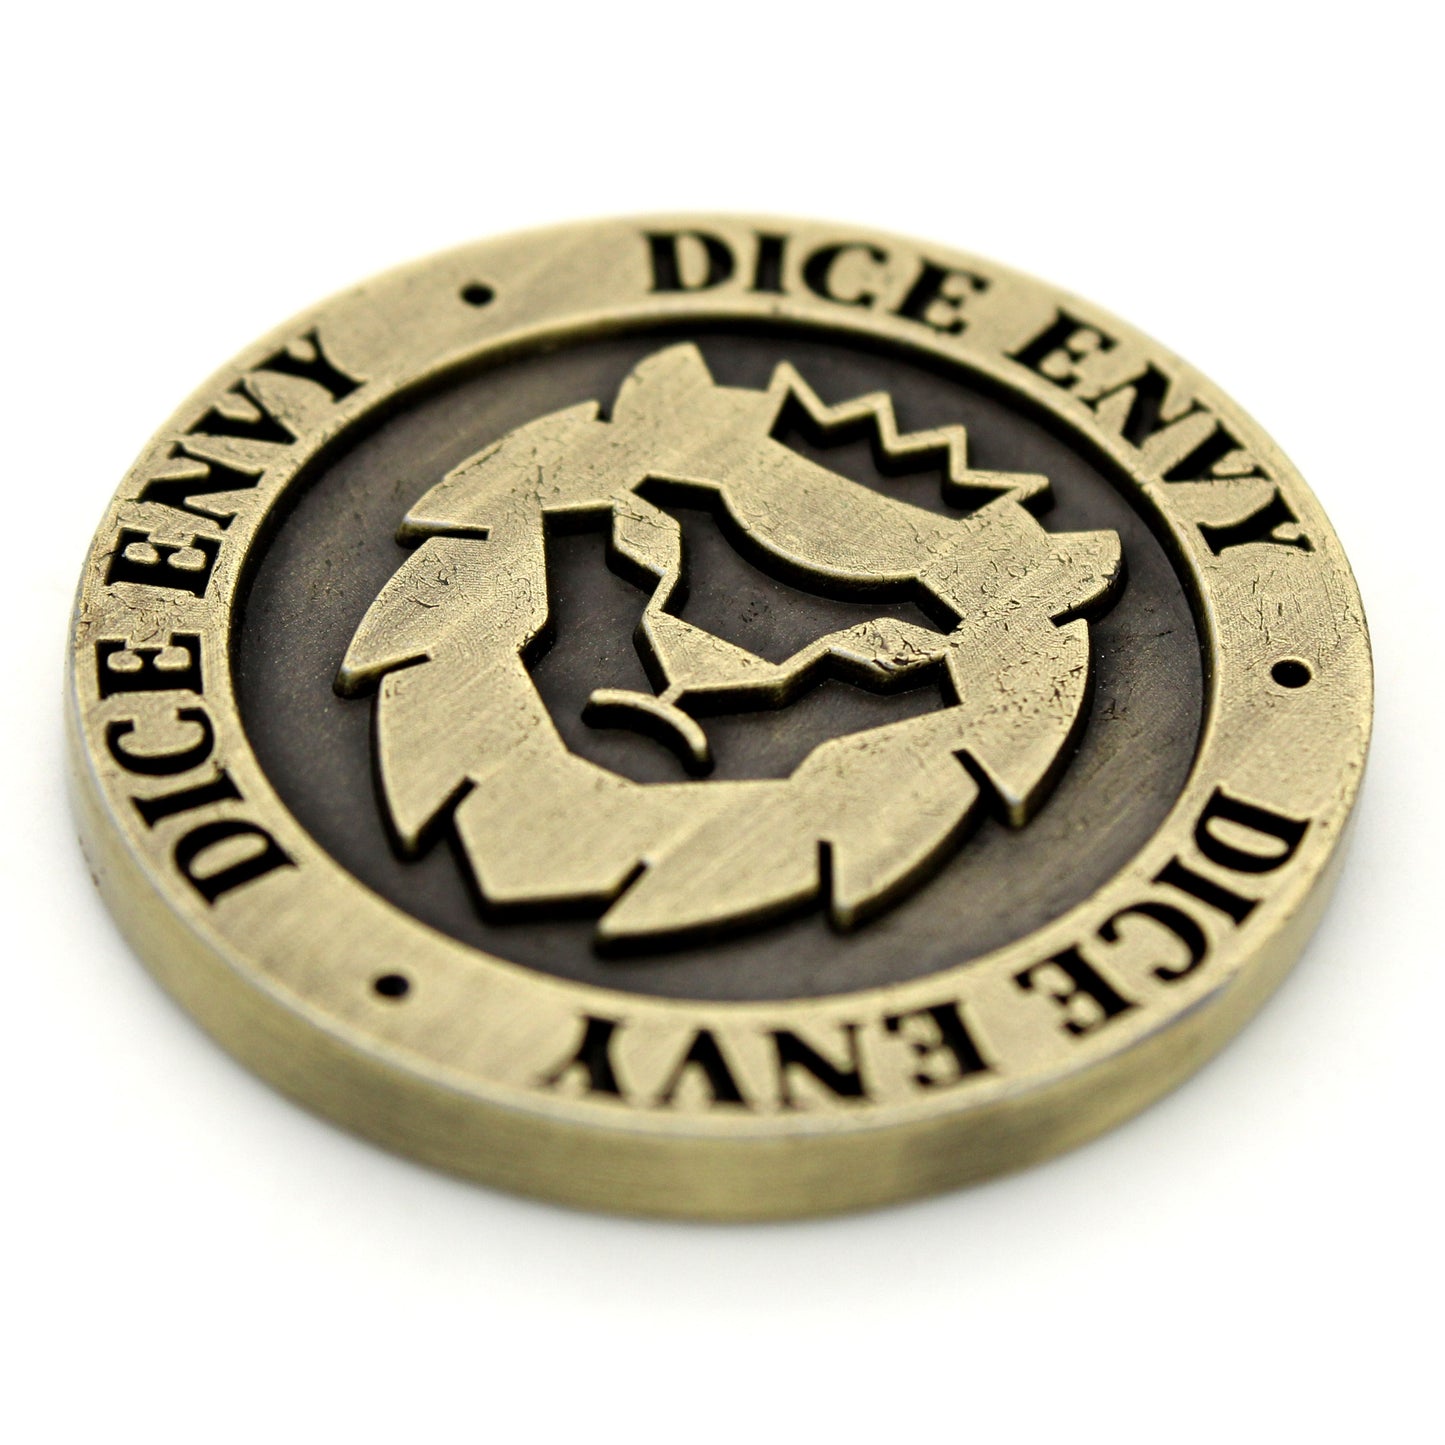 Inspiration Coins are a set of five double-sided, ancient gold colored metal tokens each measuring 30mm in diameter.